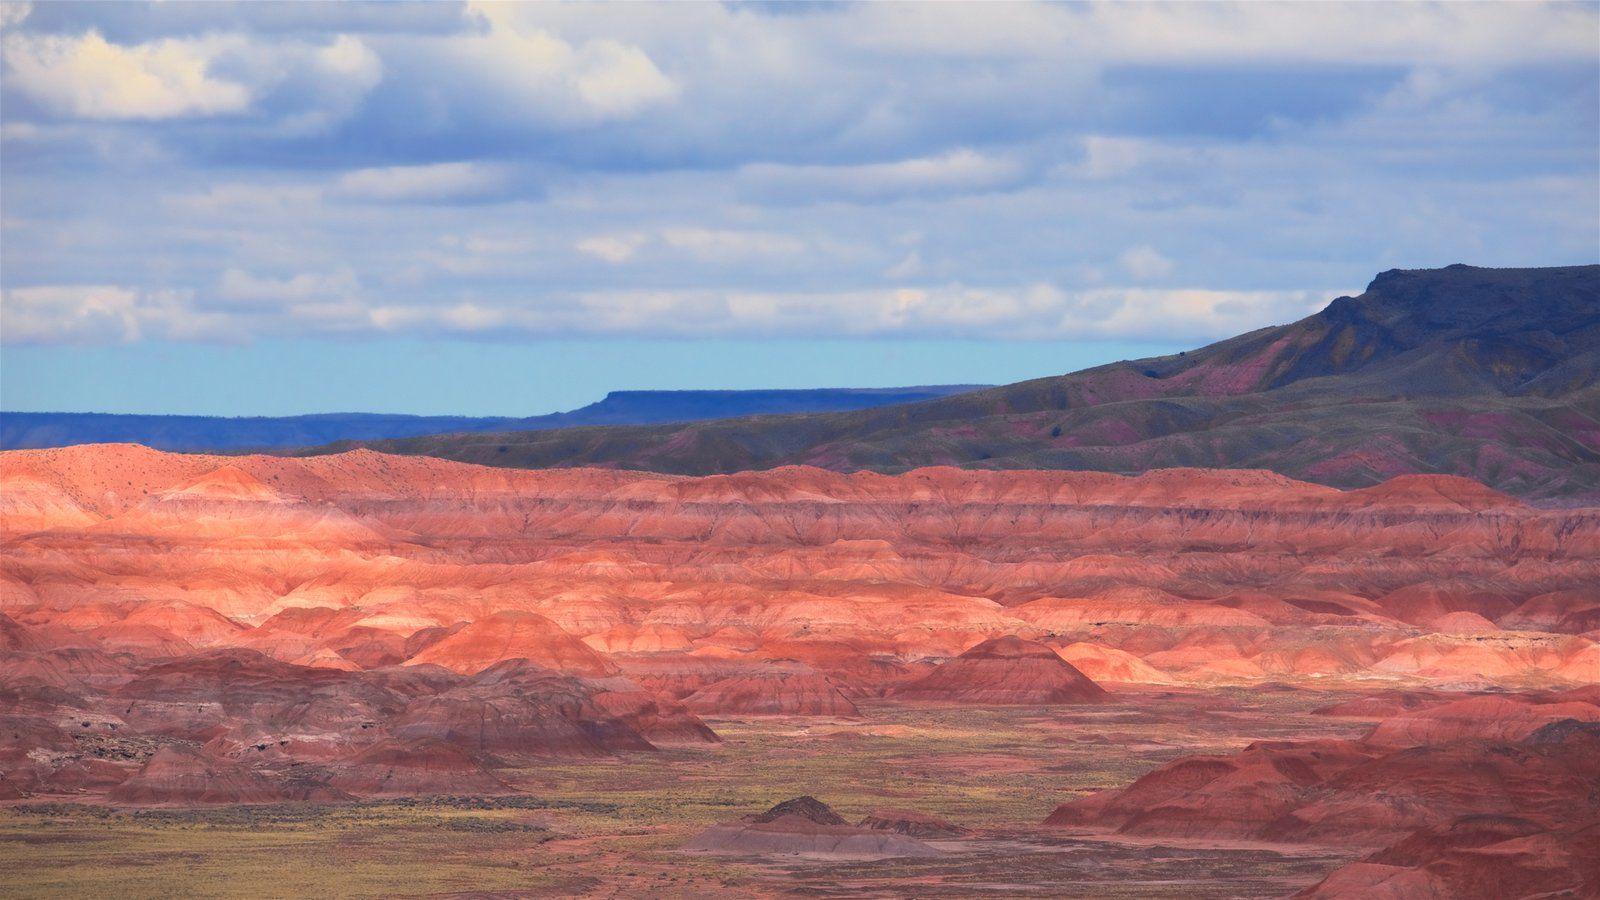 Landscape Picture: View Image of Petrified Forest National Park